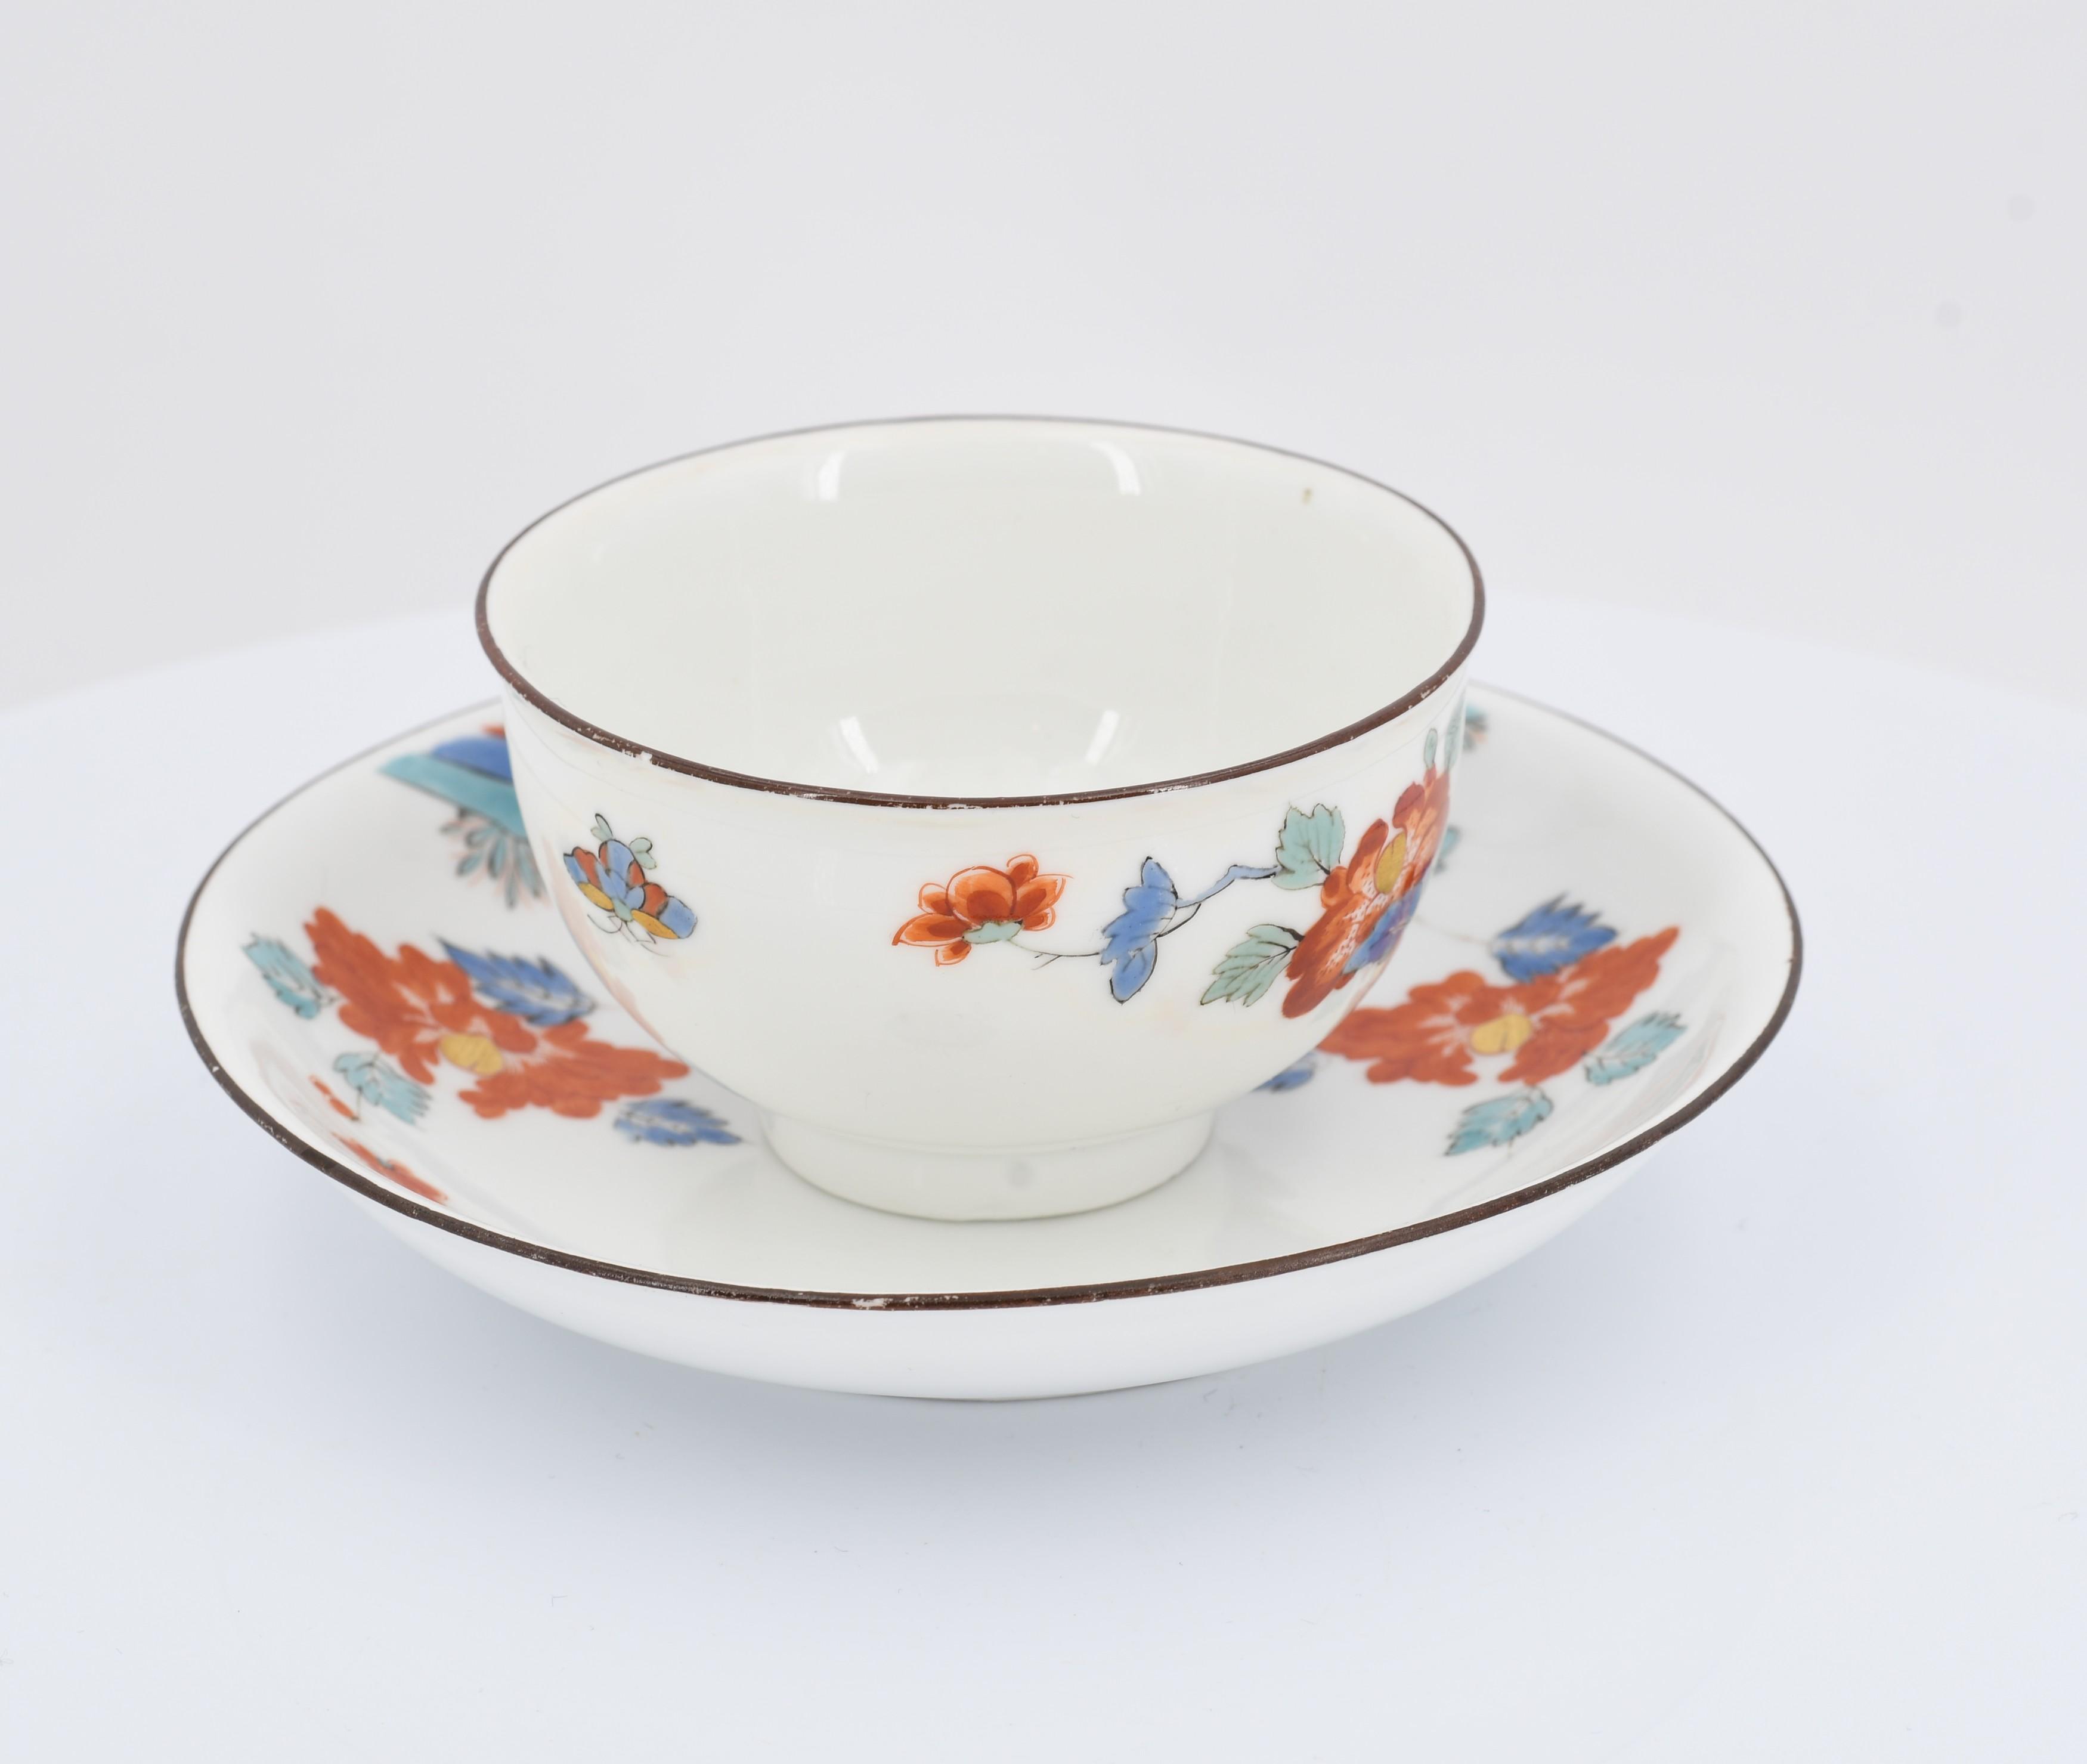 Tea bowl and saucer with Kakiemon dékor - Image 4 of 7